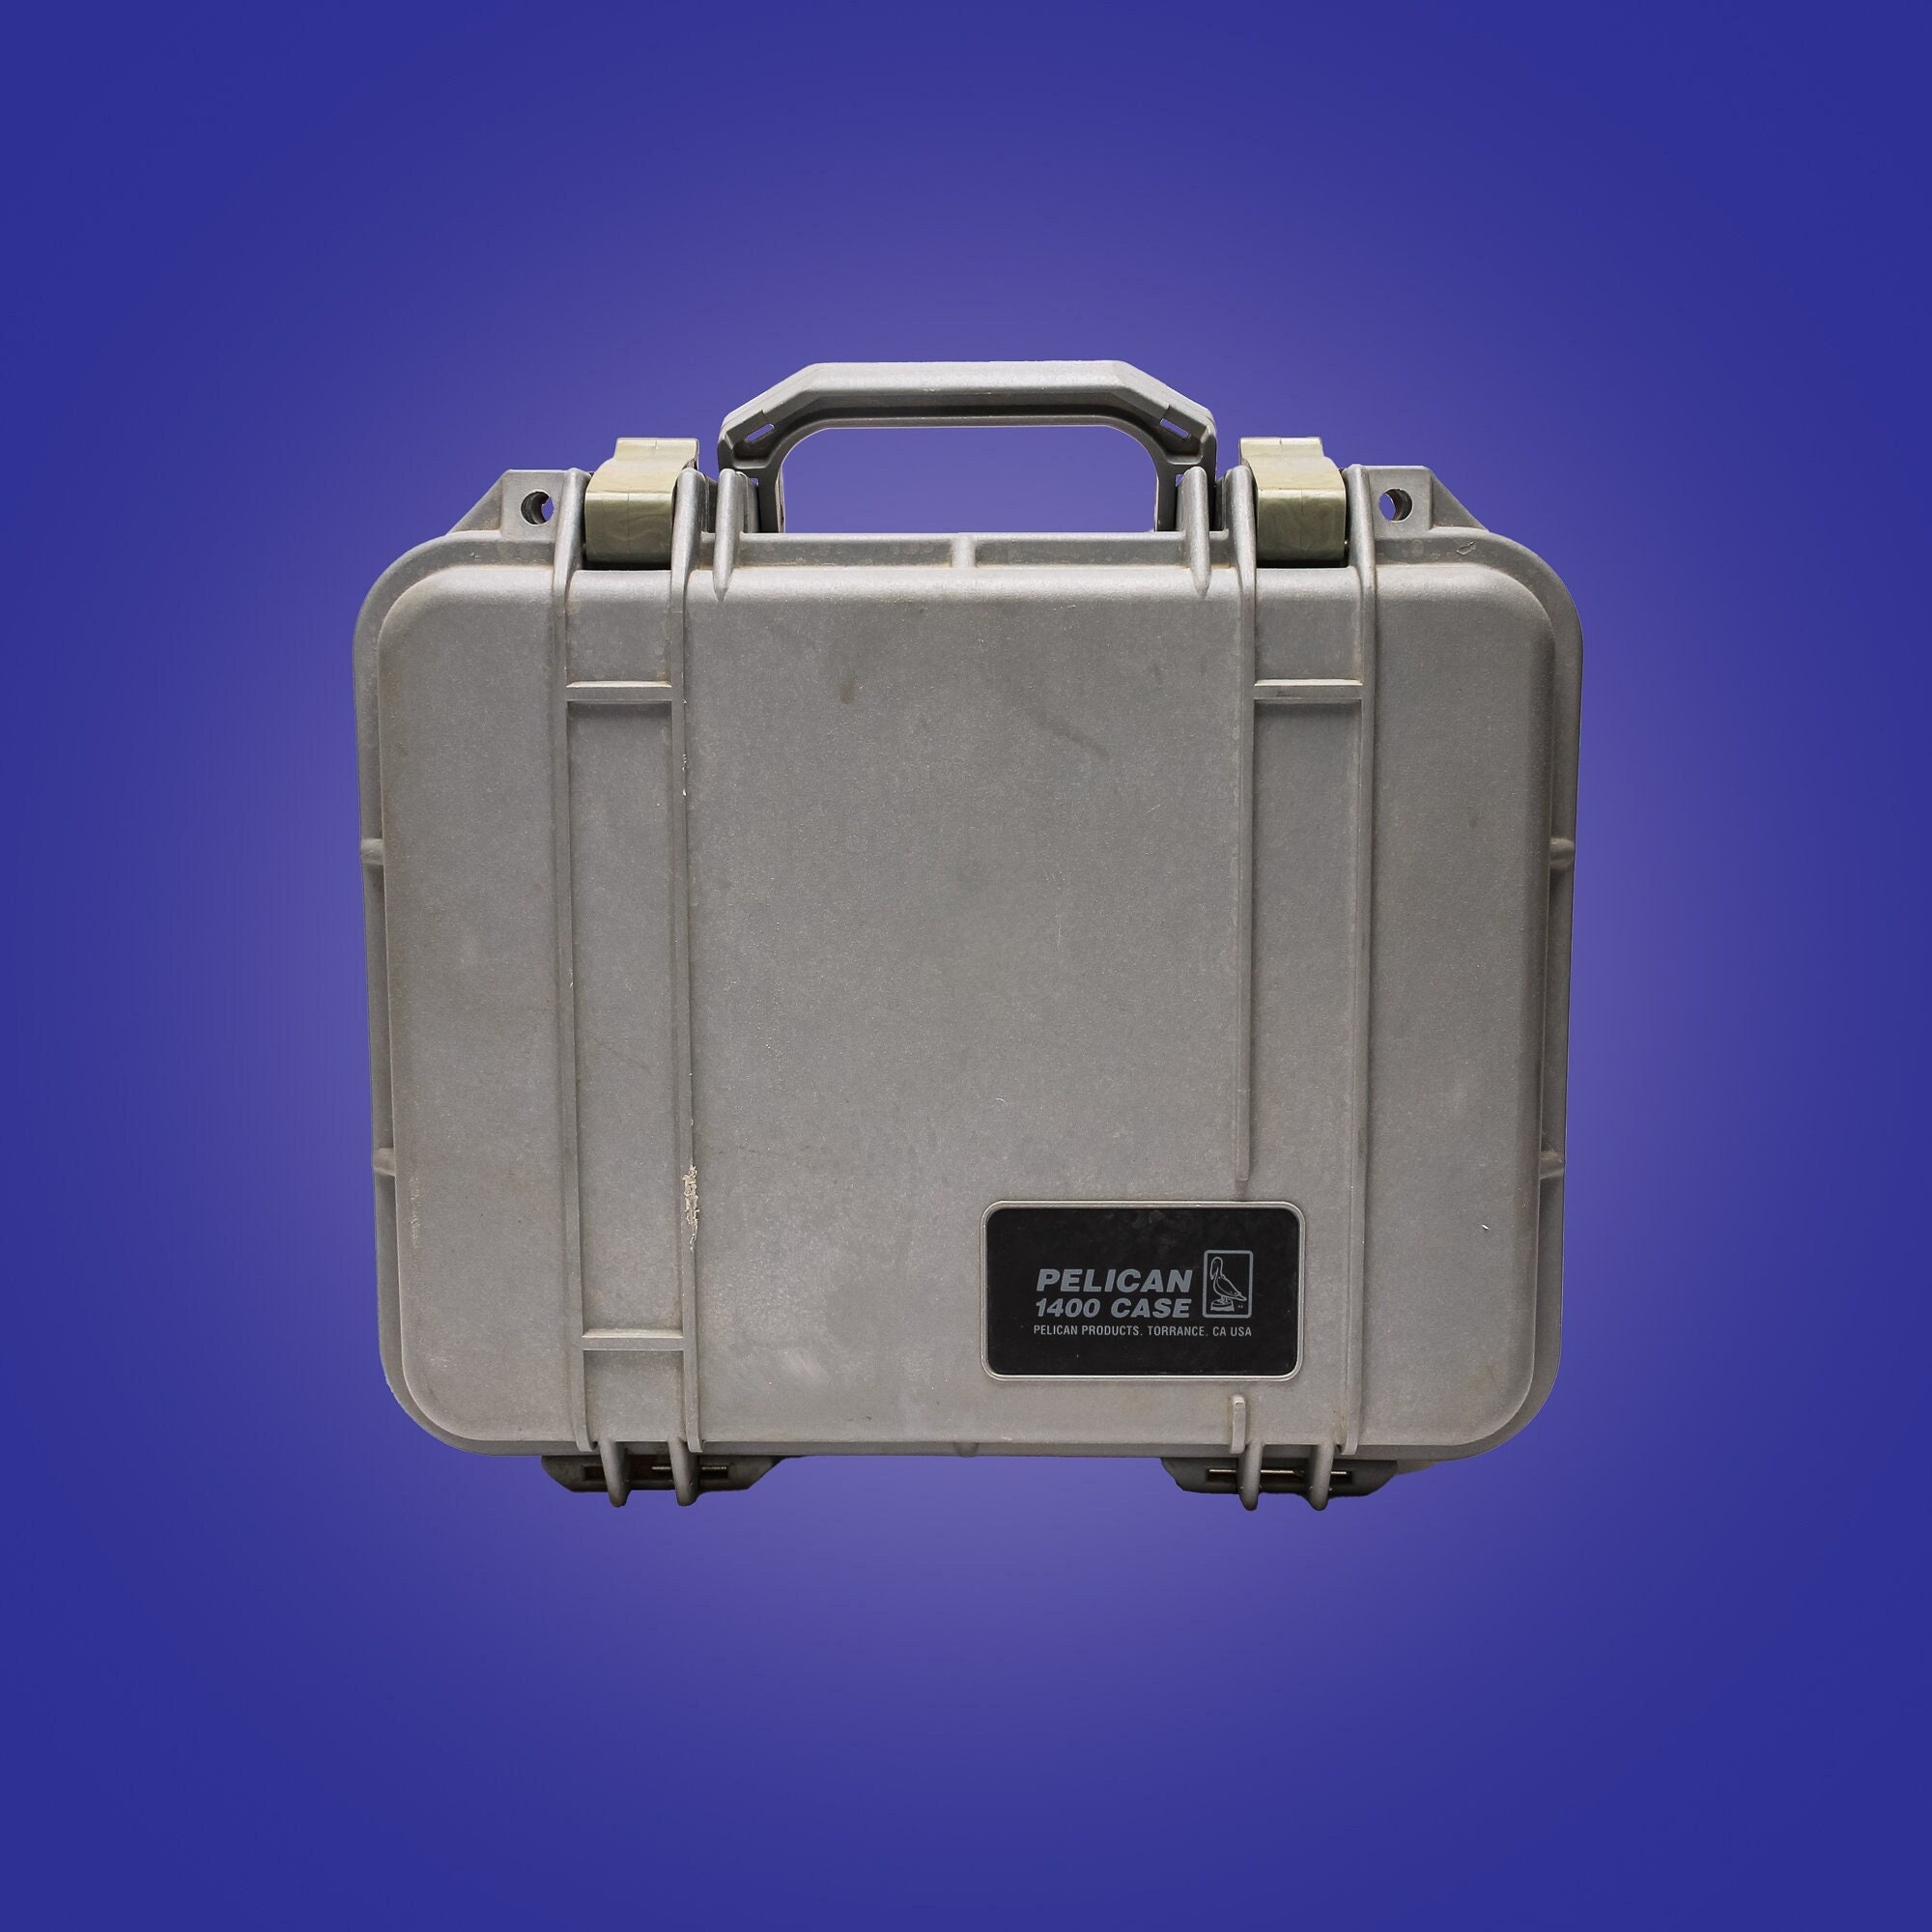 Pelican 1400 Carrying Case With Foam Inserts Maximum - Etsy